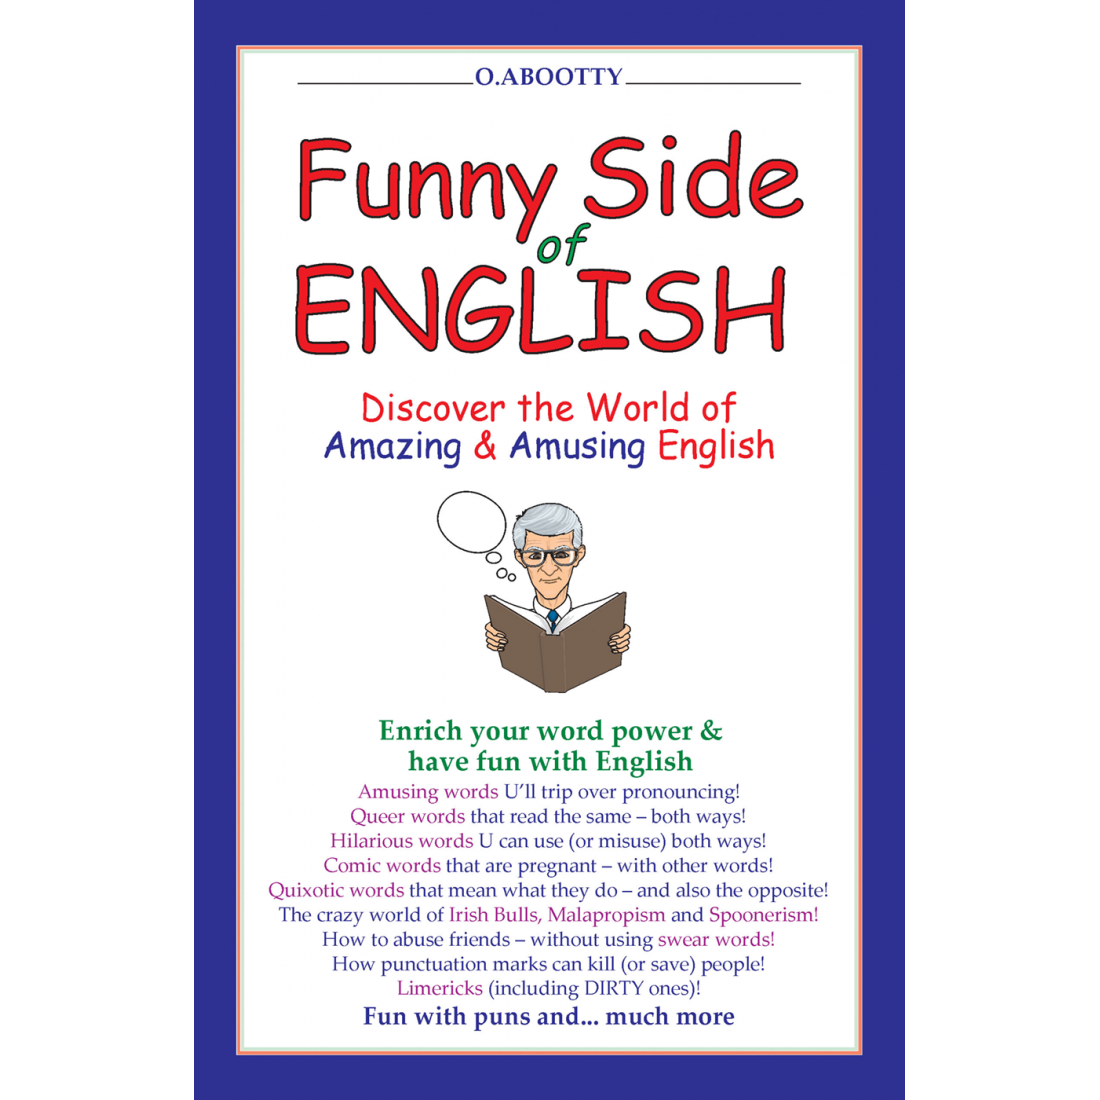 Funny Side of English